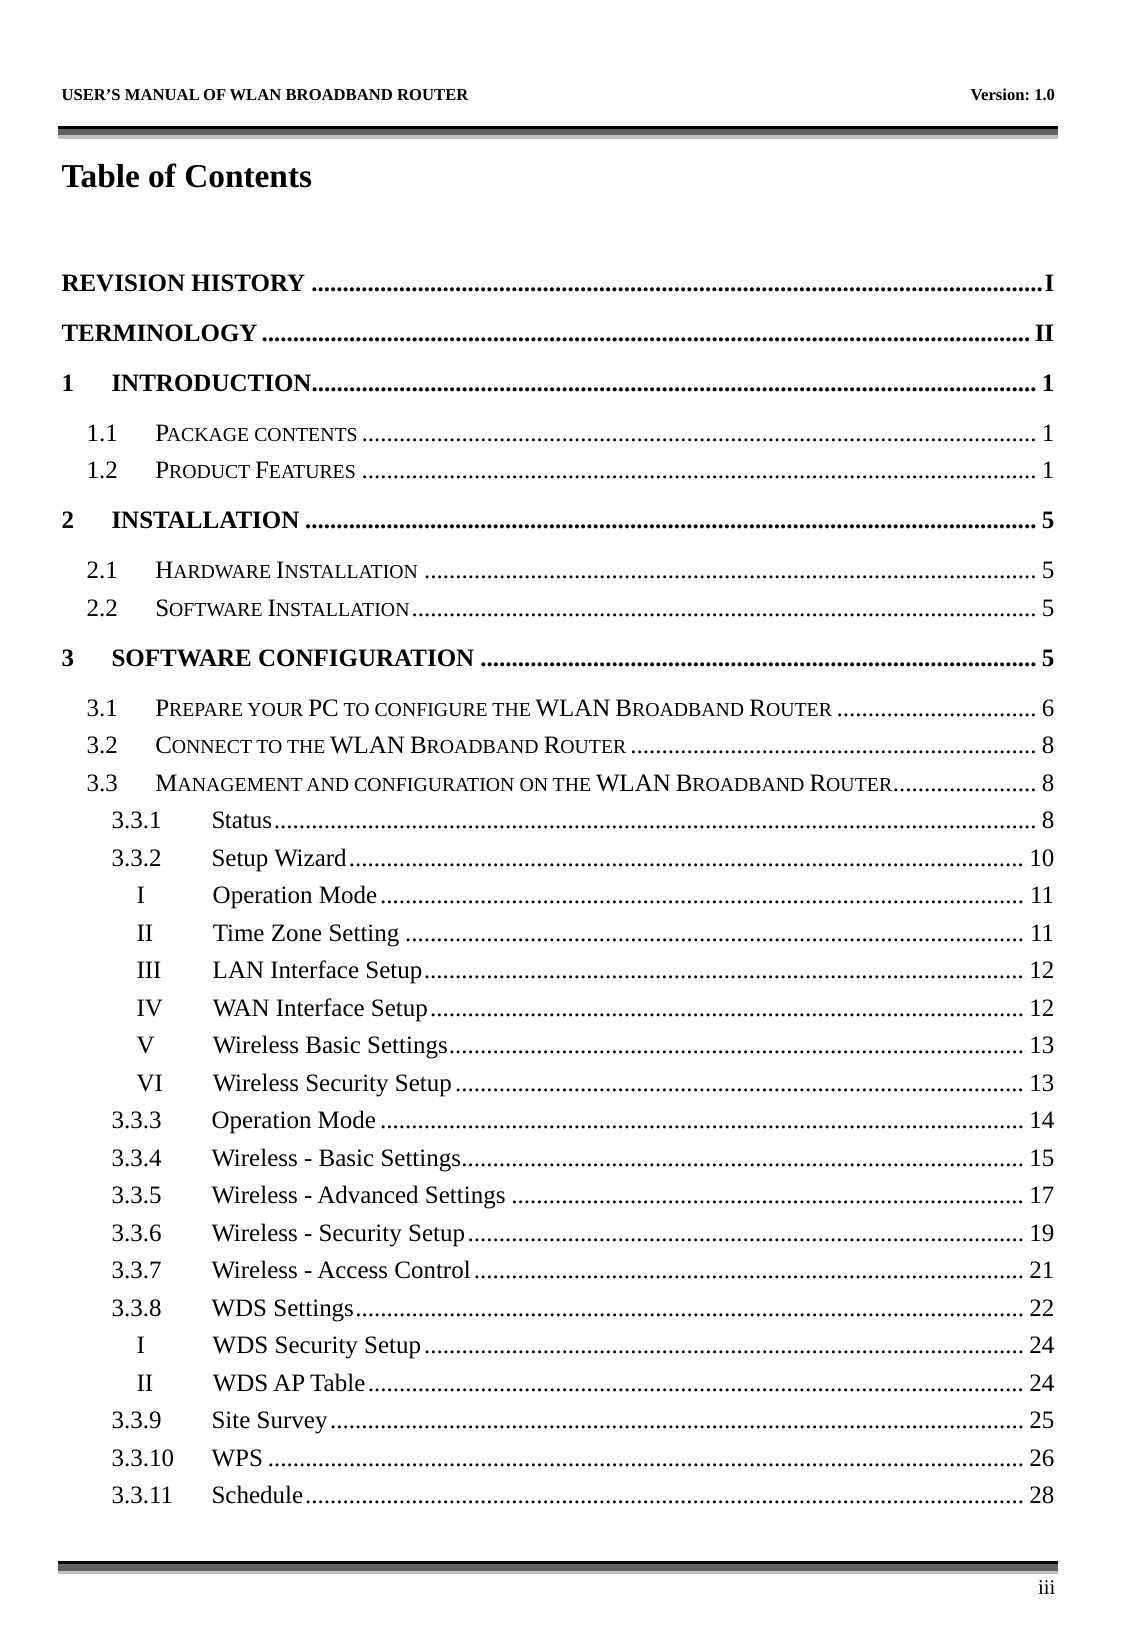   USER’S MANUAL OF WLAN BROADBAND ROUTER    Version: 1.0      iii Table of Contents  REVISION HISTORY .....................................................................................................................I TERMINOLOGY ........................................................................................................................... II 1 INTRODUCTION.................................................................................................................... 1 1.1 PACKAGE CONTENTS ............................................................................................................ 1 1.2 PRODUCT FEATURES ............................................................................................................ 1 2 INSTALLATION ..................................................................................................................... 5 2.1 HARDWARE INSTALLATION .................................................................................................. 5 2.2 SOFTWARE INSTALLATION.................................................................................................... 5 3 SOFTWARE CONFIGURATION ......................................................................................... 5 3.1 PREPARE YOUR PC TO CONFIGURE THE WLAN BROADBAND ROUTER ................................ 6 3.2 CONNECT TO THE WLAN BROADBAND ROUTER ................................................................. 8 3.3 MANAGEMENT AND CONFIGURATION ON THE WLAN BROADBAND ROUTER....................... 8 3.3.1 Status.......................................................................................................................... 8 3.3.2 Setup Wizard............................................................................................................ 10 I Operation Mode....................................................................................................... 11 II Time Zone Setting ................................................................................................... 11 III  LAN Interface Setup................................................................................................ 12 IV  WAN Interface Setup............................................................................................... 12 V  Wireless Basic Settings............................................................................................ 13 VI  Wireless Security Setup........................................................................................... 13 3.3.3 Operation Mode ....................................................................................................... 14 3.3.4  Wireless - Basic Settings.......................................................................................... 15 3.3.5  Wireless - Advanced Settings .................................................................................. 17 3.3.6  Wireless - Security Setup......................................................................................... 19 3.3.7  Wireless - Access Control........................................................................................ 21 3.3.8 WDS Settings........................................................................................................... 22 I WDS Security Setup................................................................................................ 24 II WDS AP Table......................................................................................................... 24 3.3.9 Site Survey............................................................................................................... 25 3.3.10 WPS ......................................................................................................................... 26 3.3.11 Schedule................................................................................................................... 28 